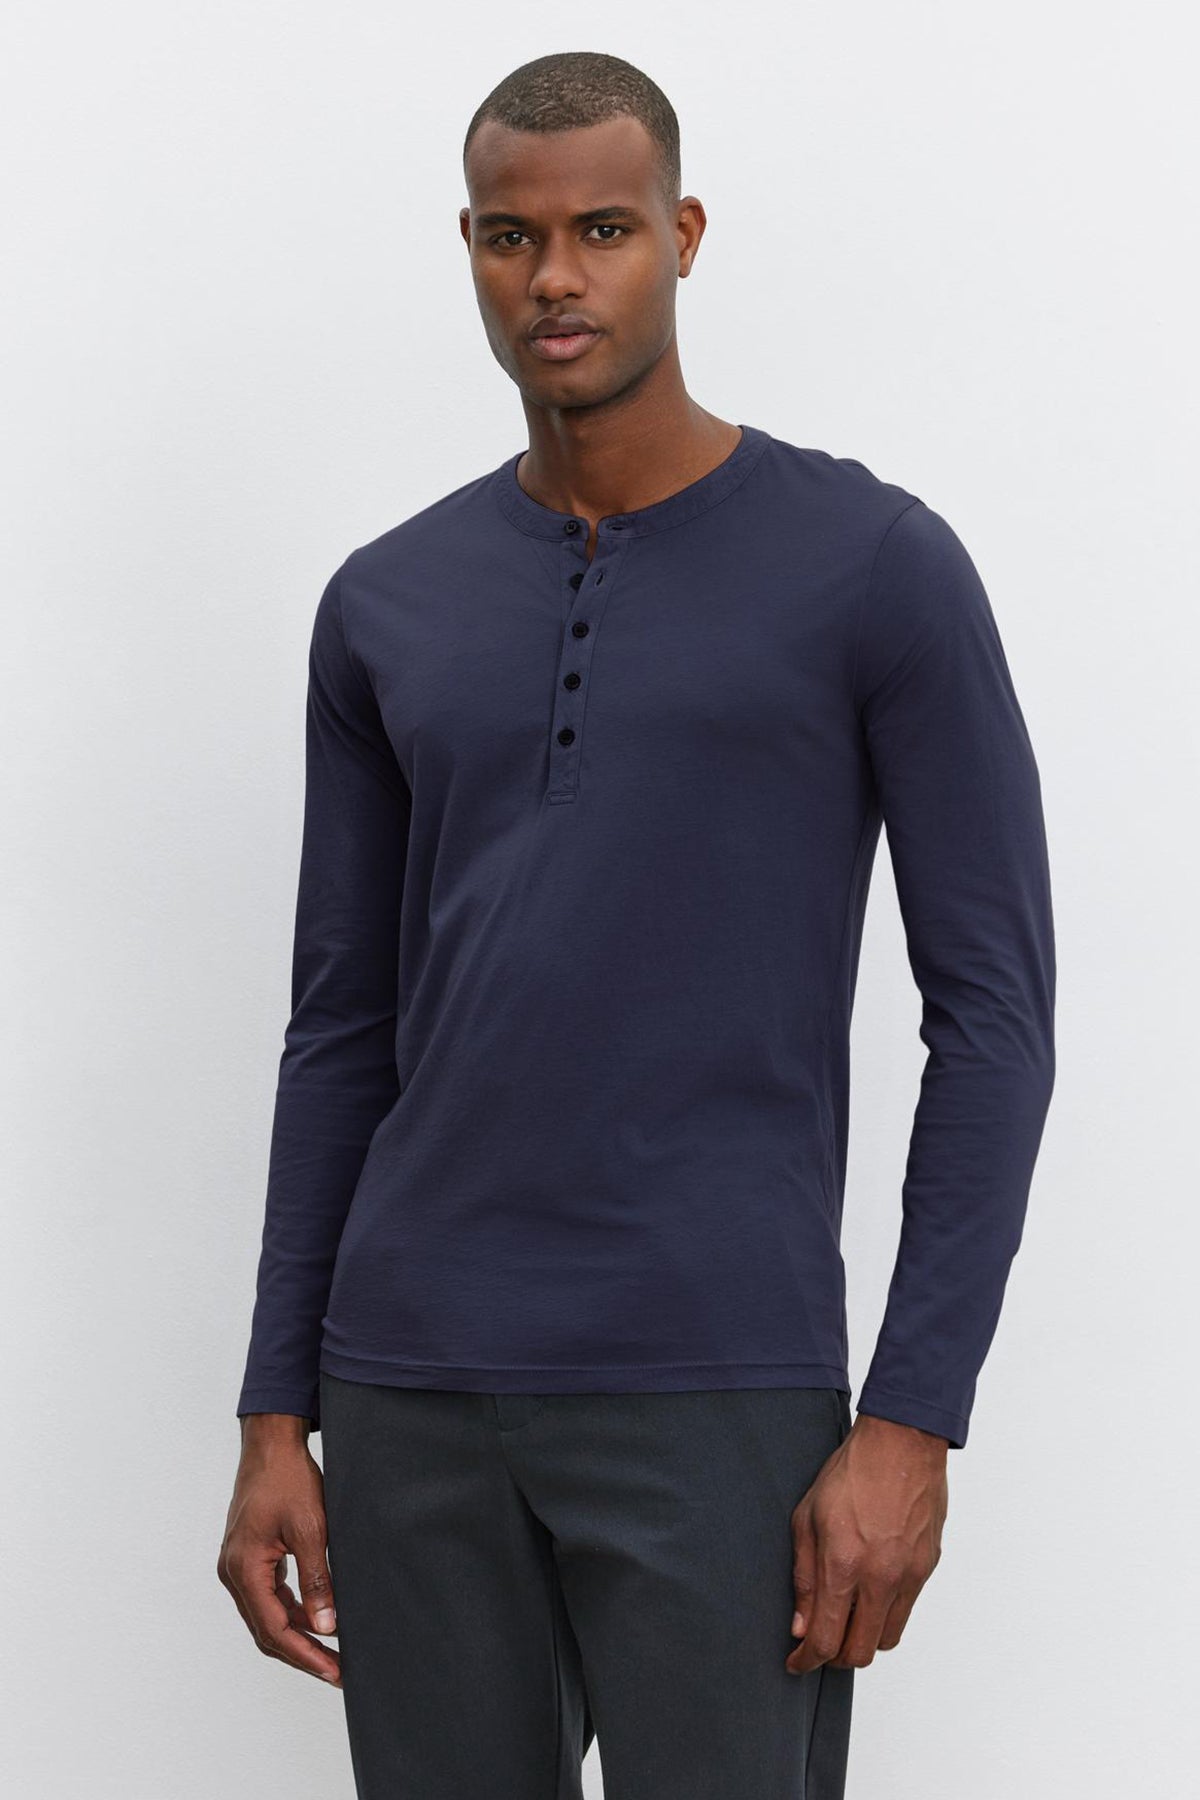 The model is wearing a lightweight navy long sleeve ALVARO COTTON JERSEY HENLEY t-shirt by Velvet by Graham & Spencer.-36273890525377